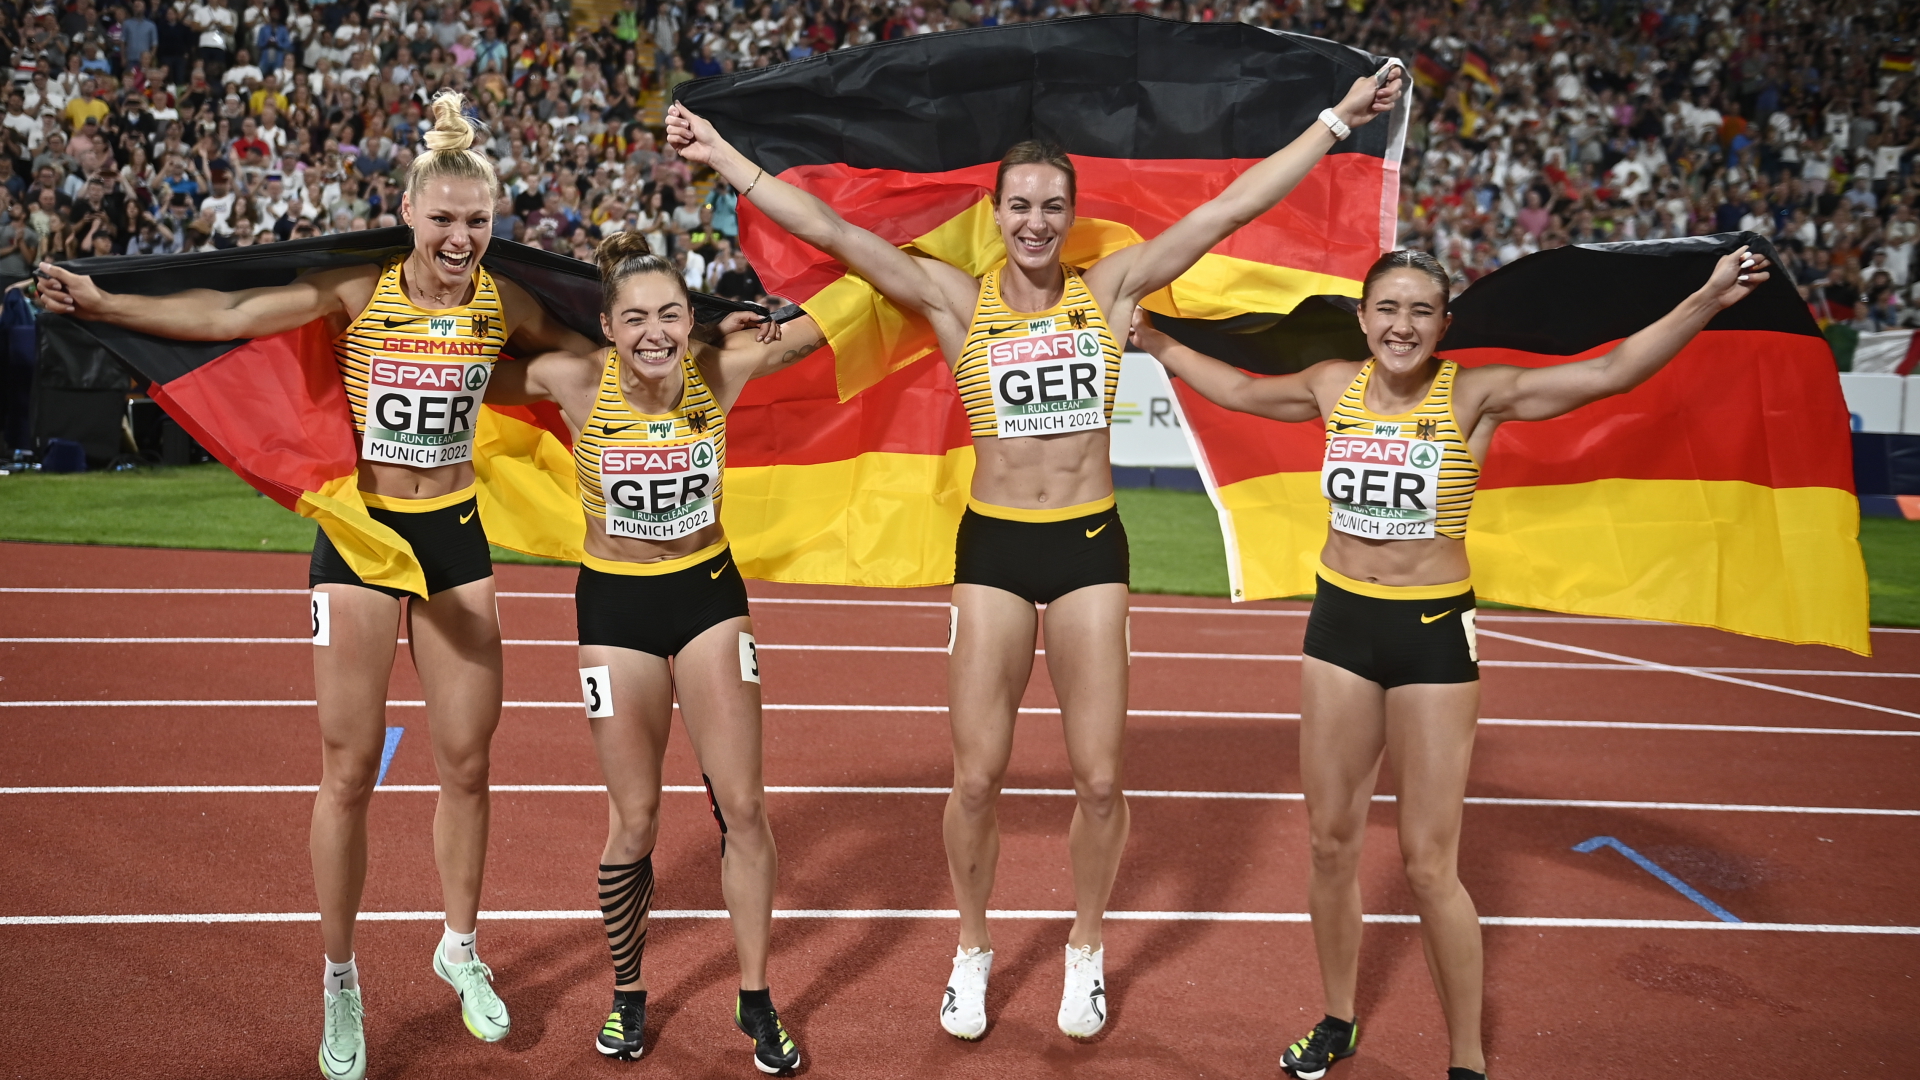 European Championships: Weber wins gold in women's sprint relay and javelin throw

